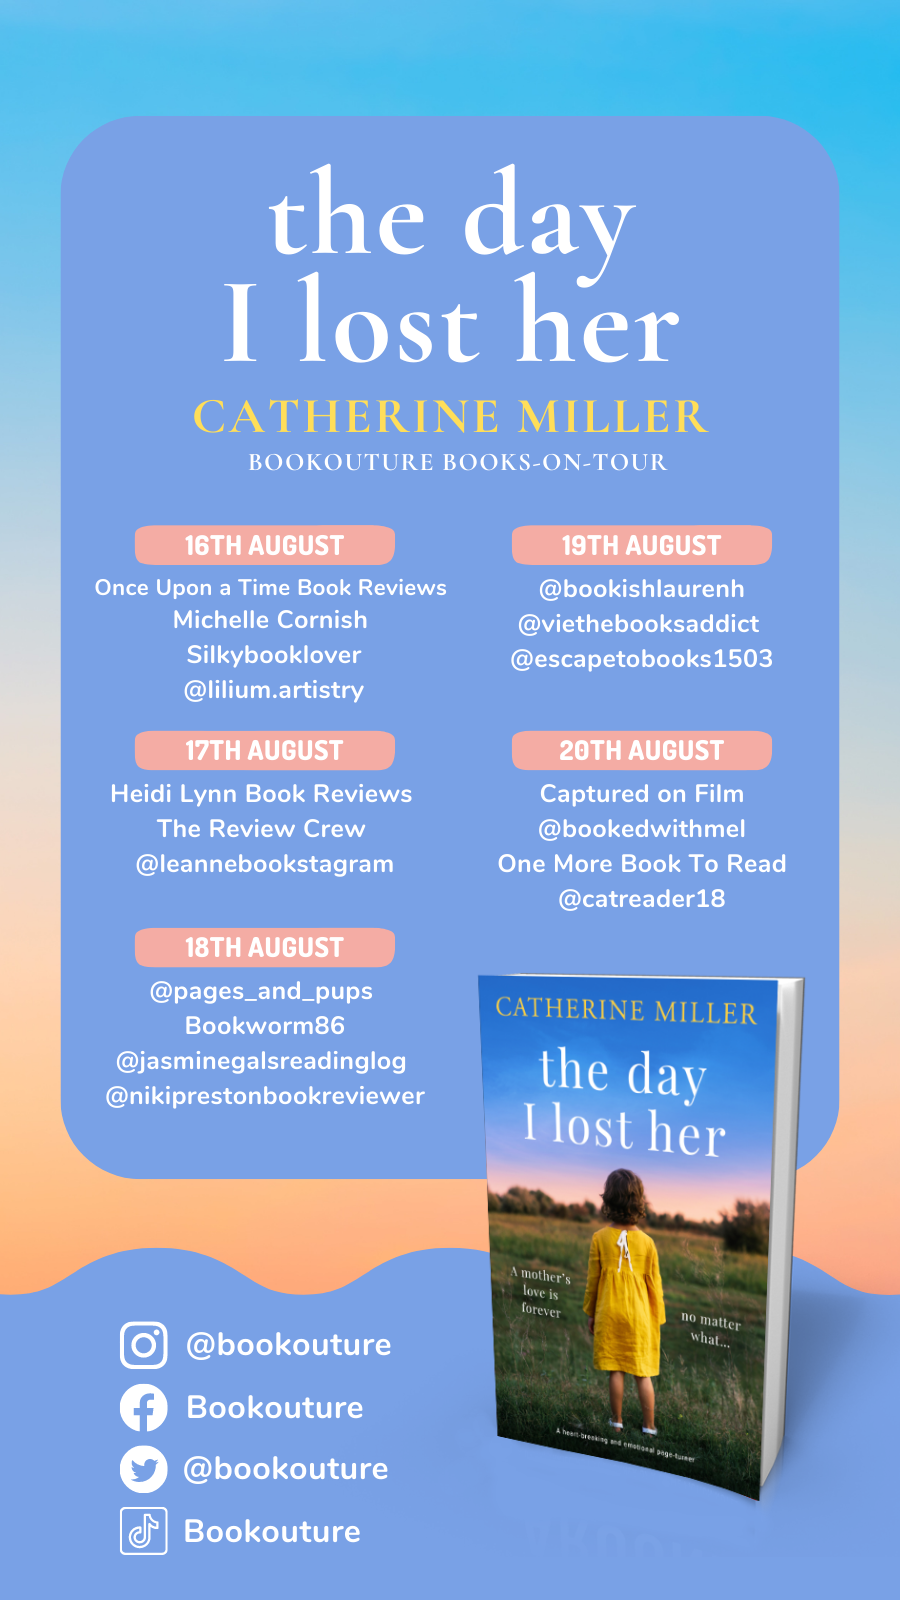 The Day I Lost Her by Catherine Miller book tour